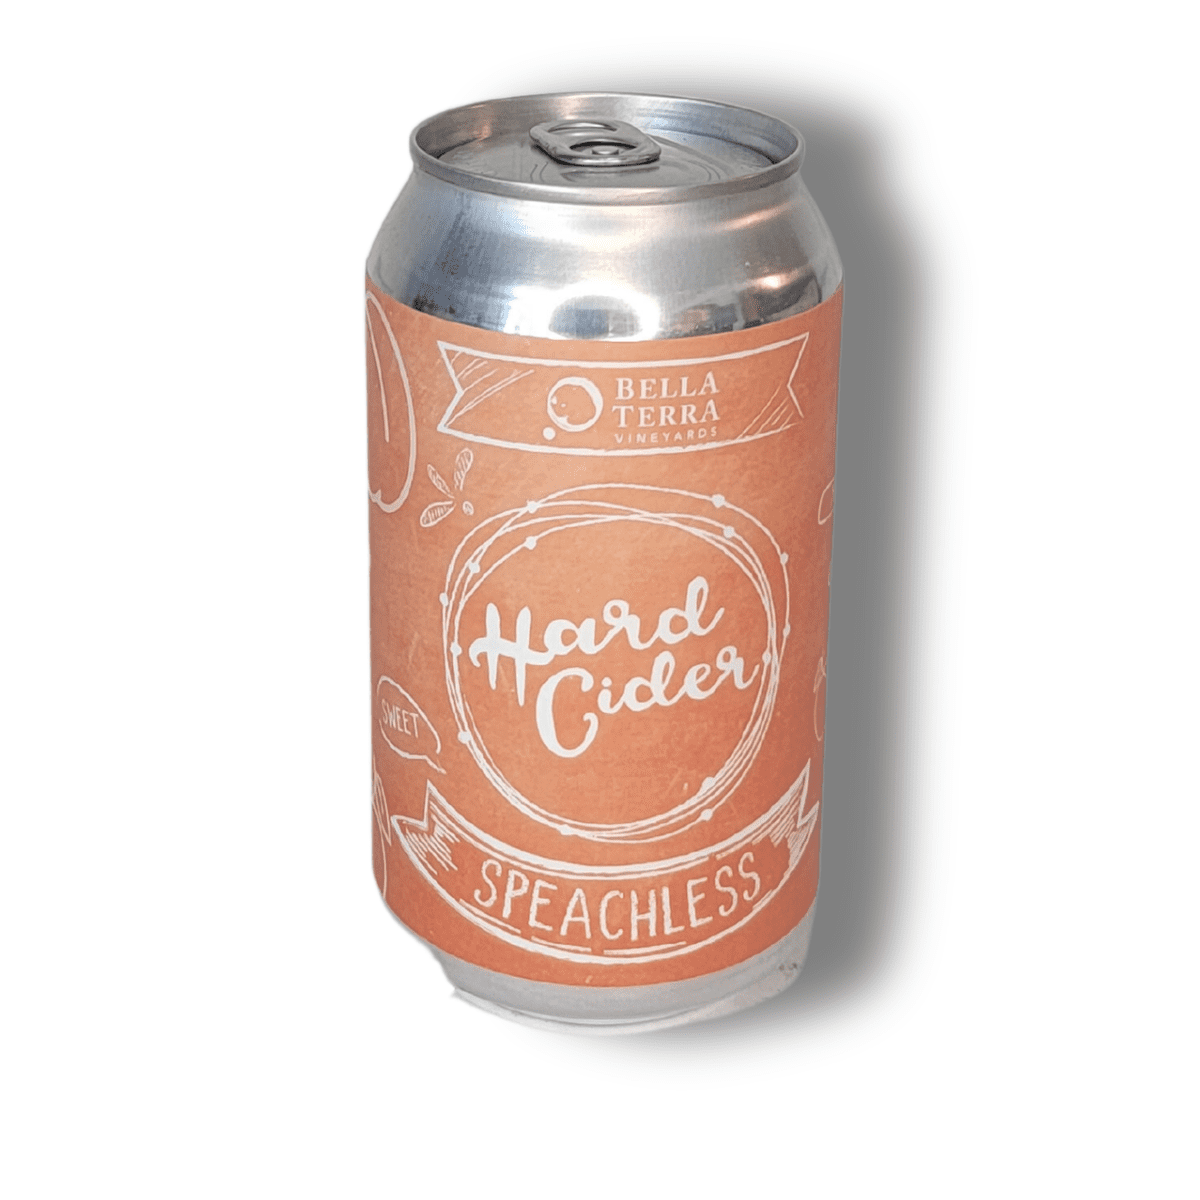 Bella Terra - Speachless Cider 4-Pack - 12oz Can